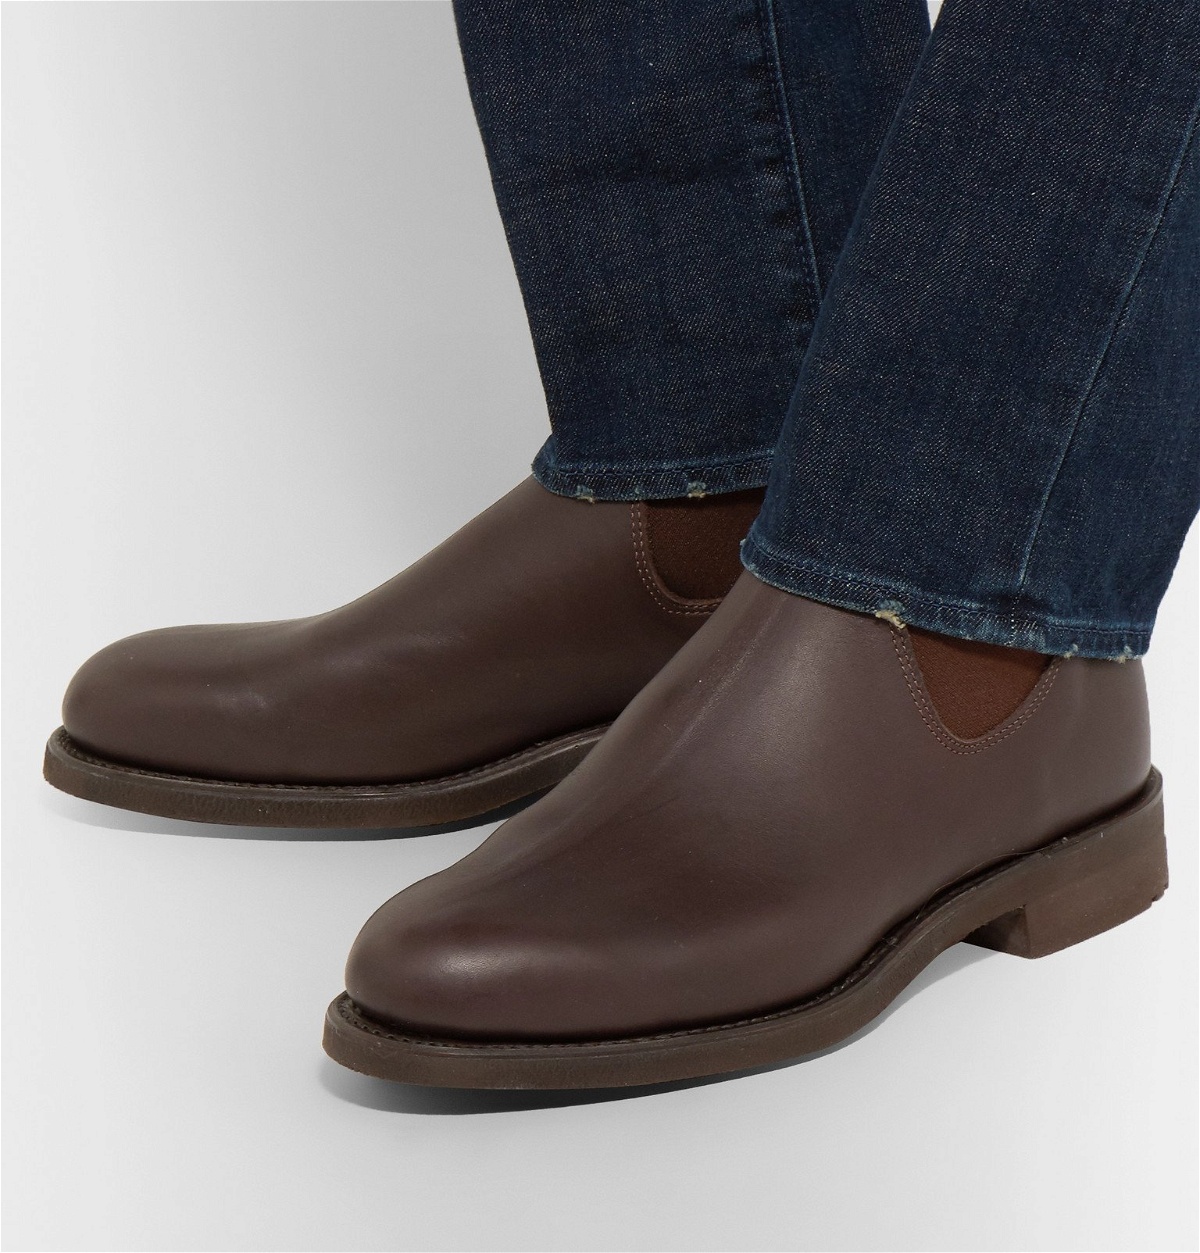 Chocolate Gardener Boots, R.M.Williams Chelsea Boots